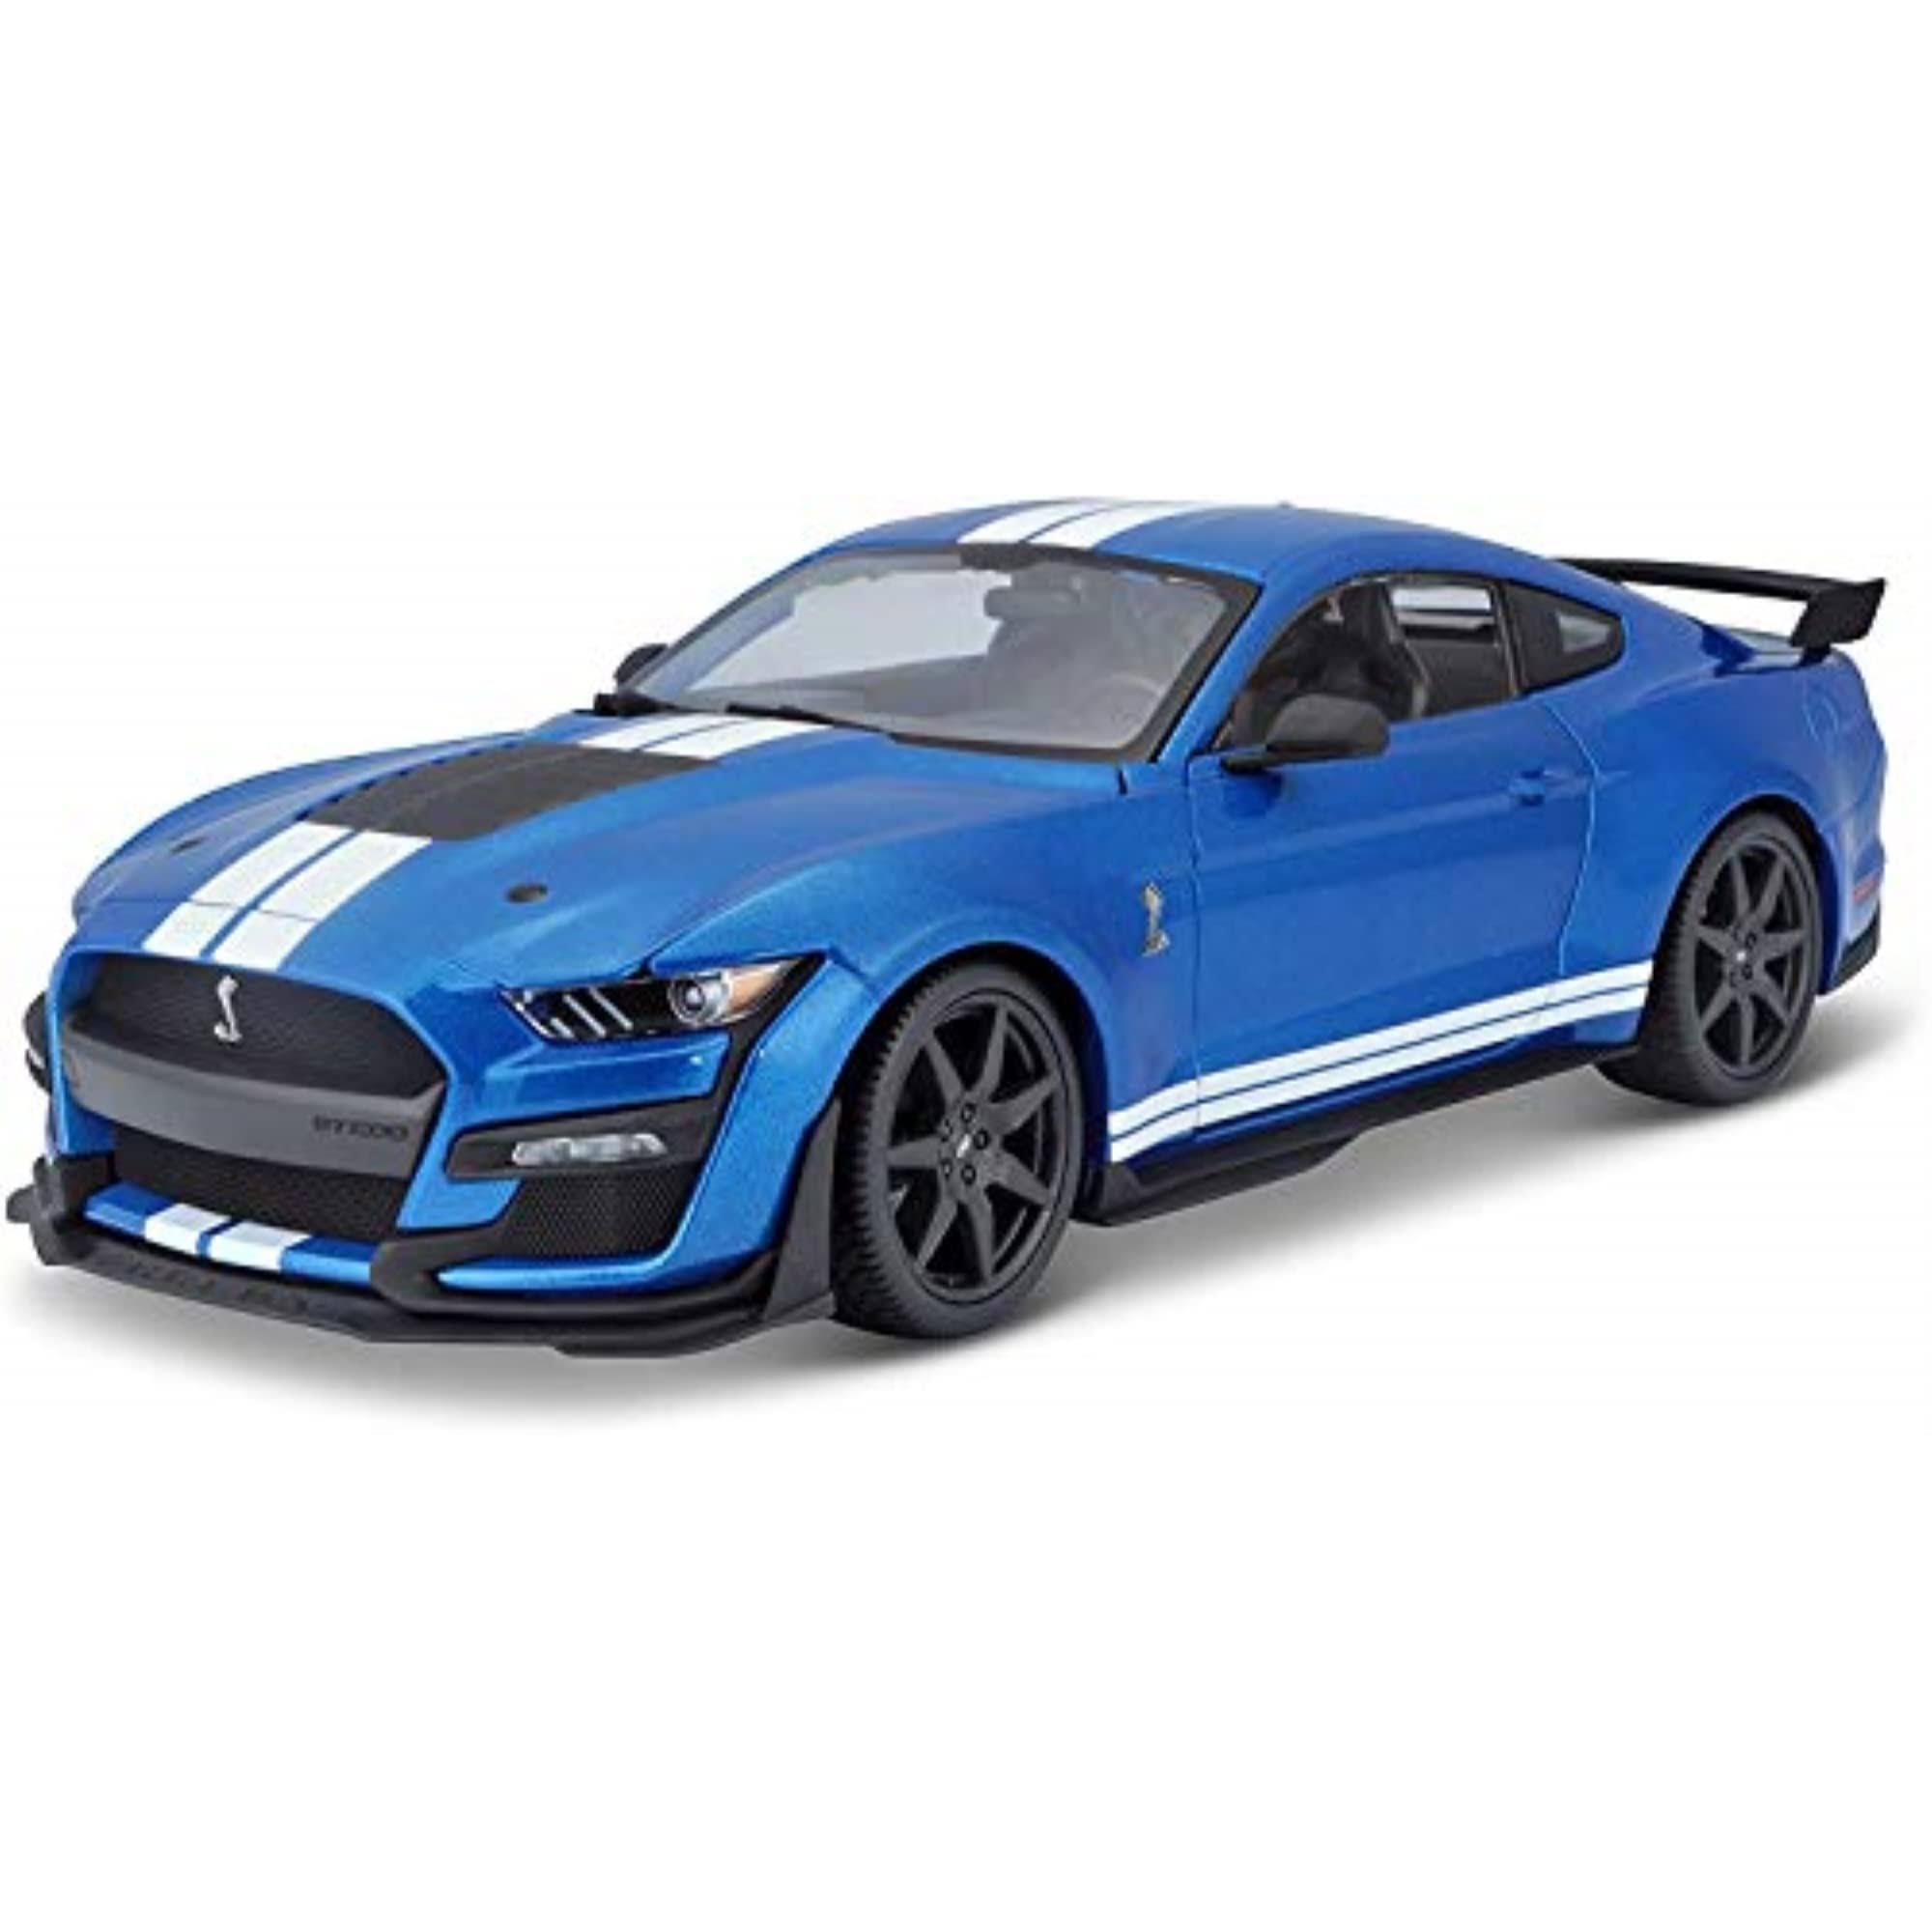 Maisto 2020 Ford Shelby GT500 1:18 Diecast Model